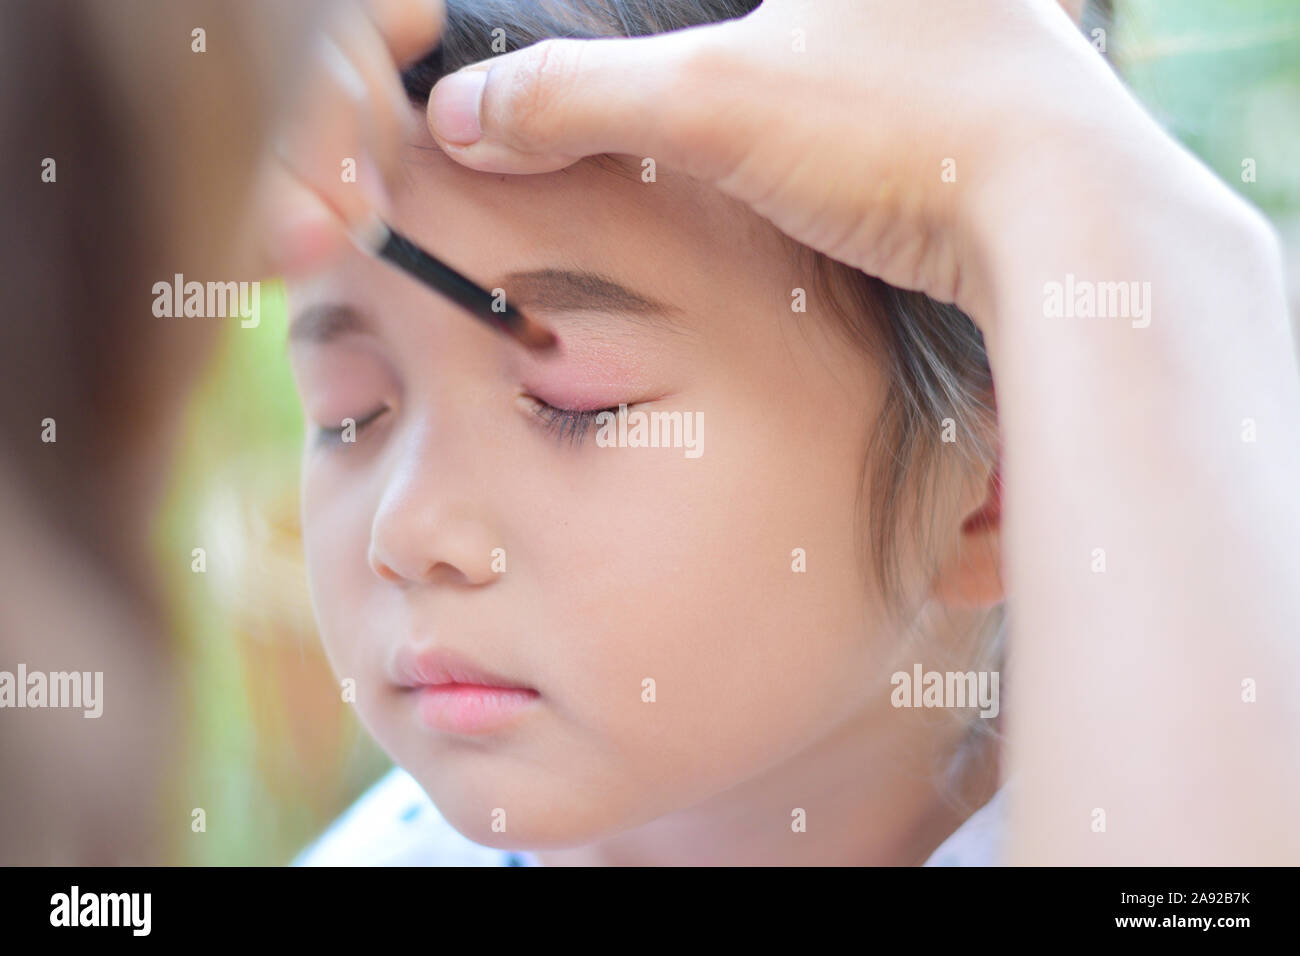 little girl getting her face for makeup by makeup artist Stock Photo